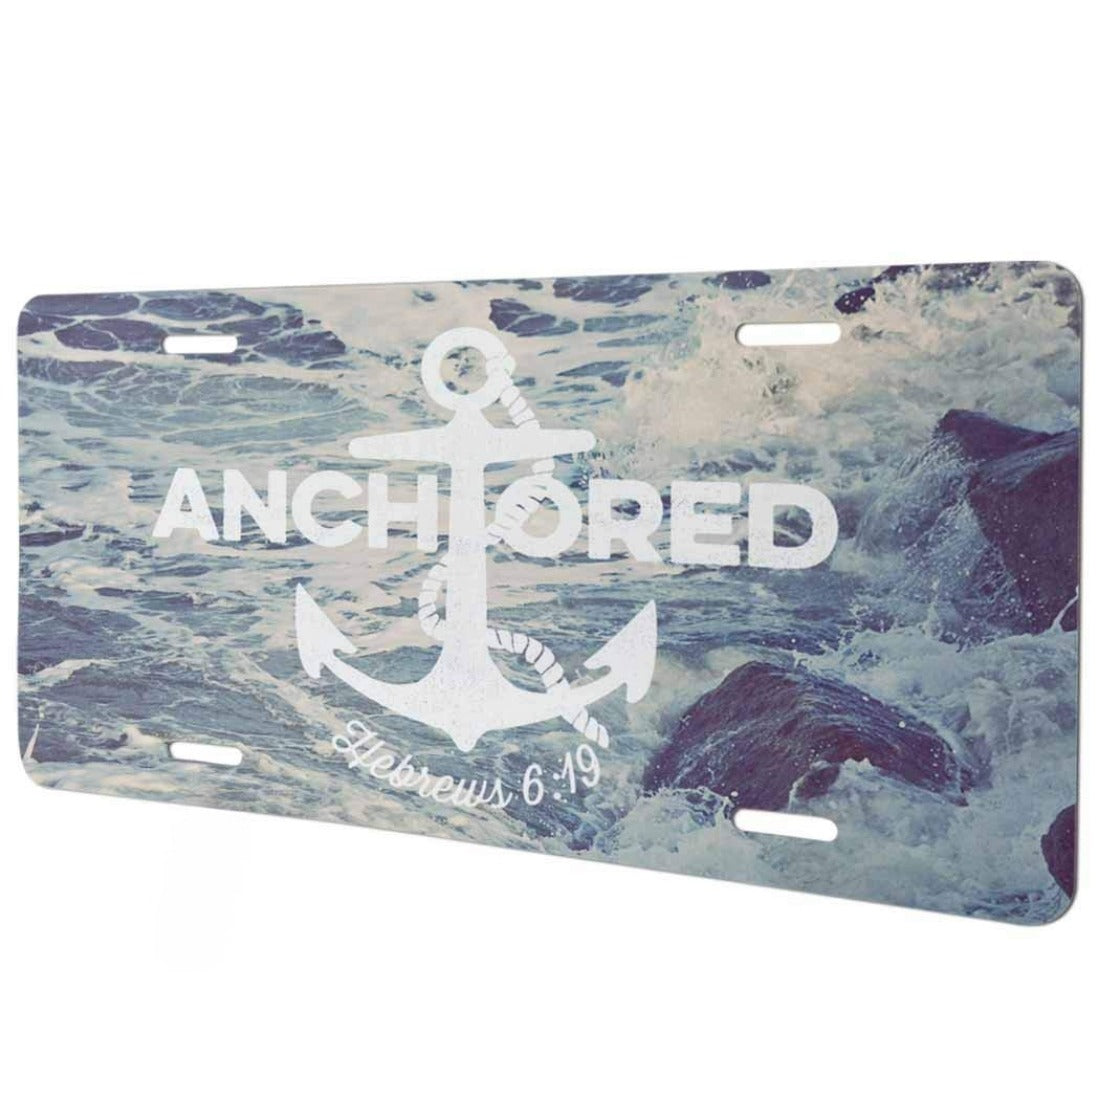 We Have This Hope As An Anchor For The Soul Hebrew Christian Front License Plate 6x12 Inch claimedbygoddesigns